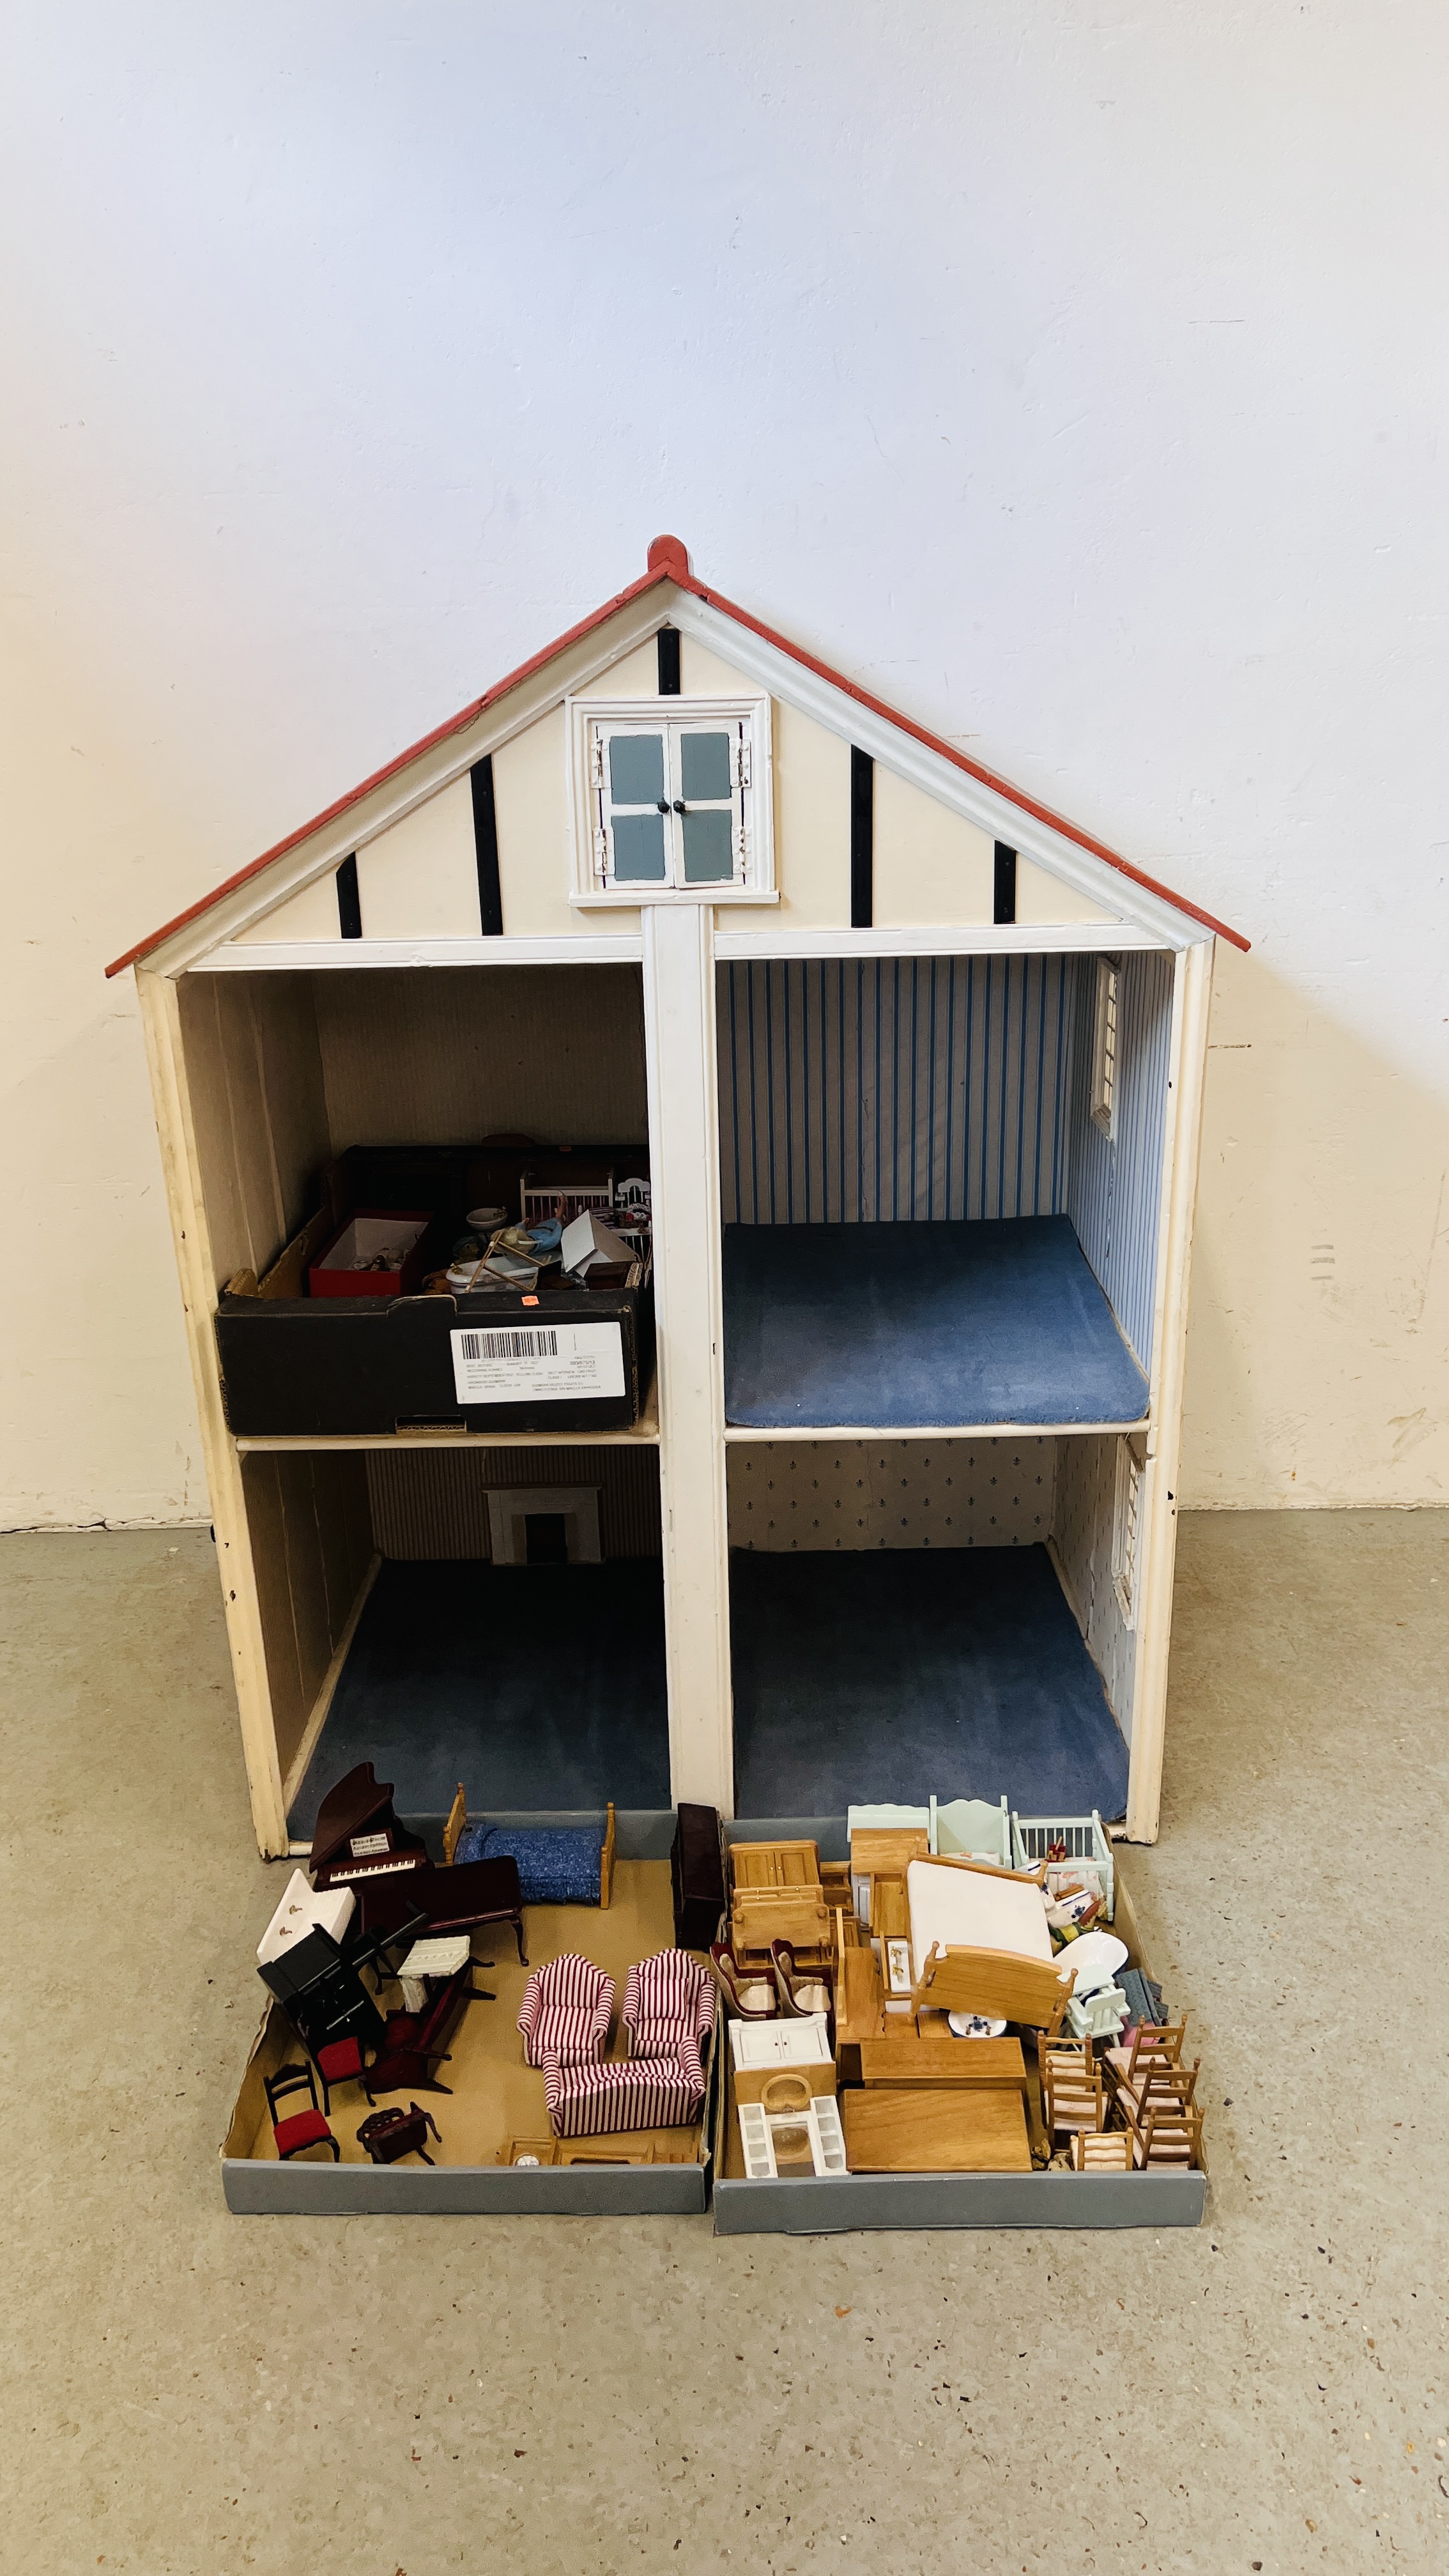 AN EXTENSIVE COLLECTION IN THREE BOXES OF DOLLS HOUSE FURNITURE AND ACCESSORIES ALONG WITH A LARGE